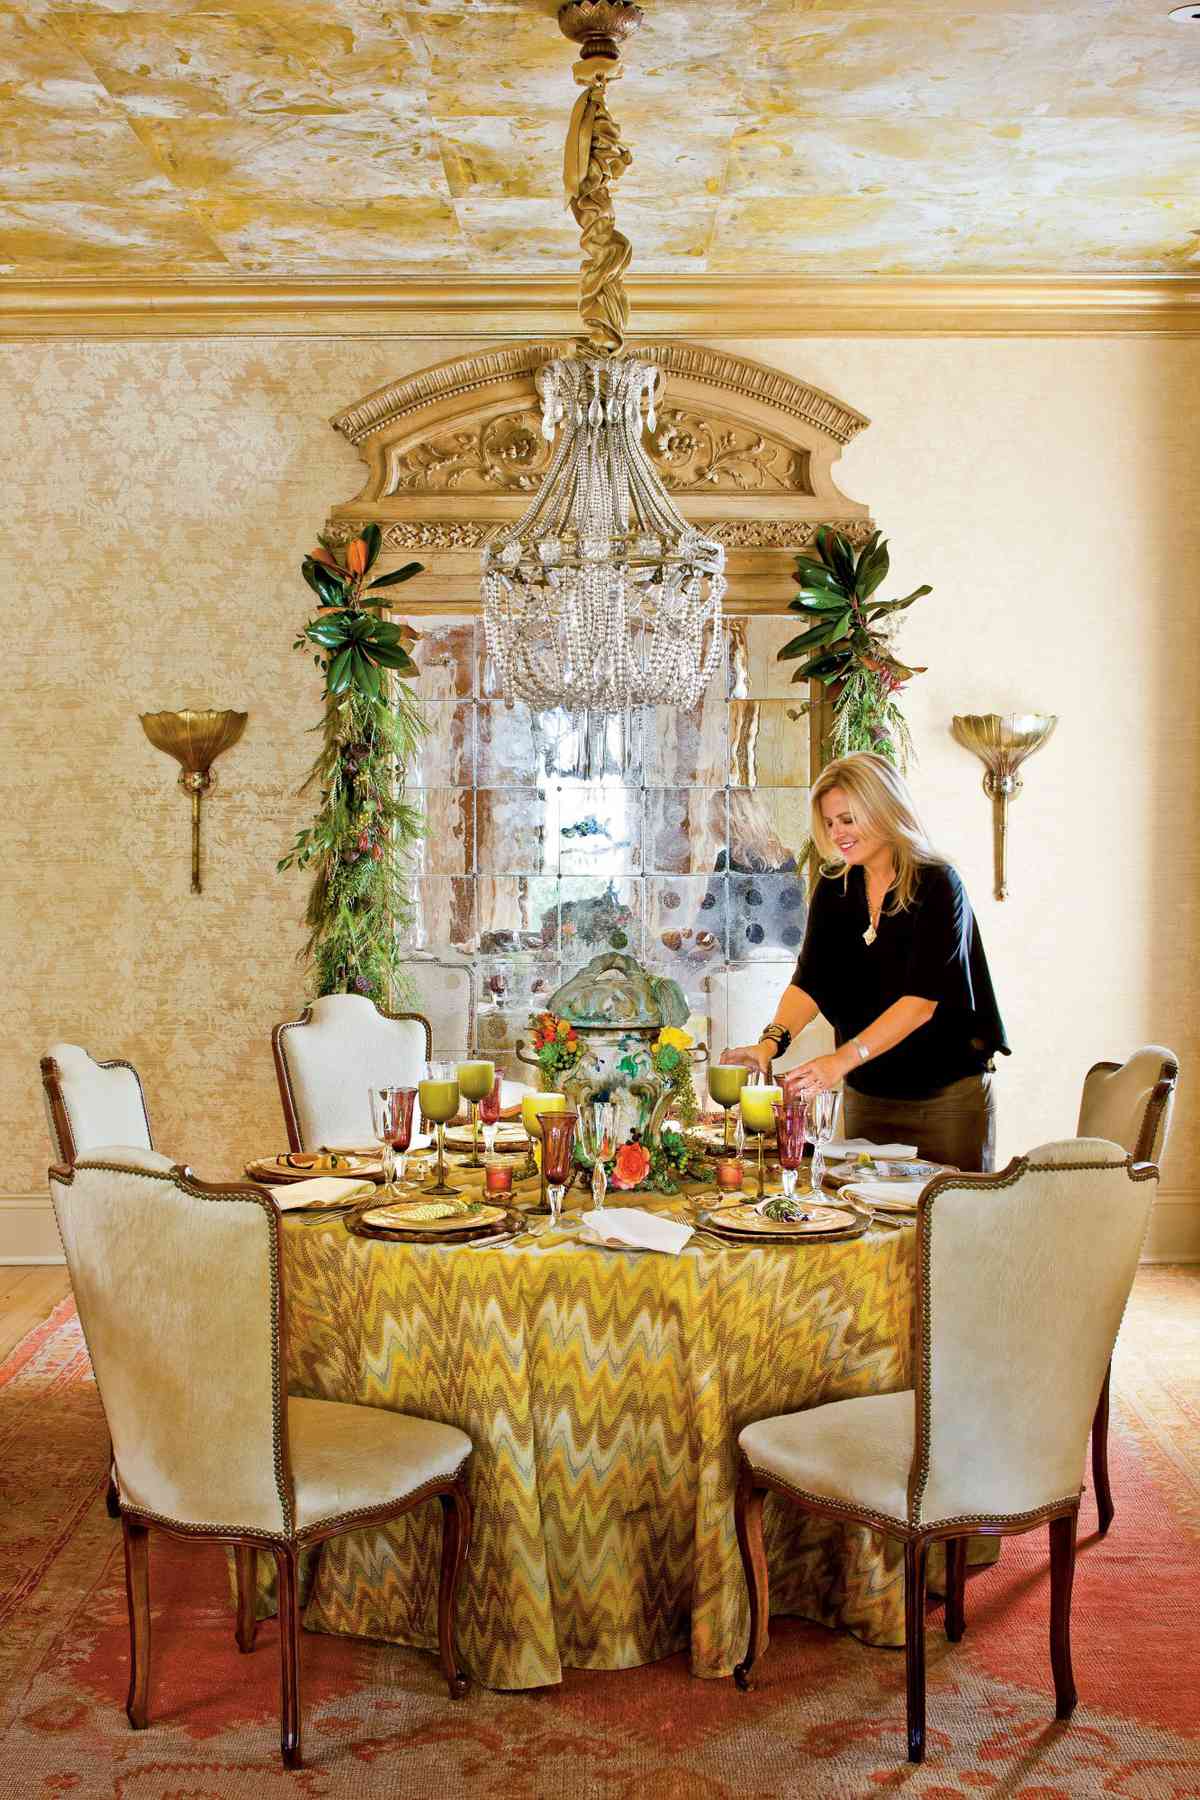 New Orleans-Style Table Setting